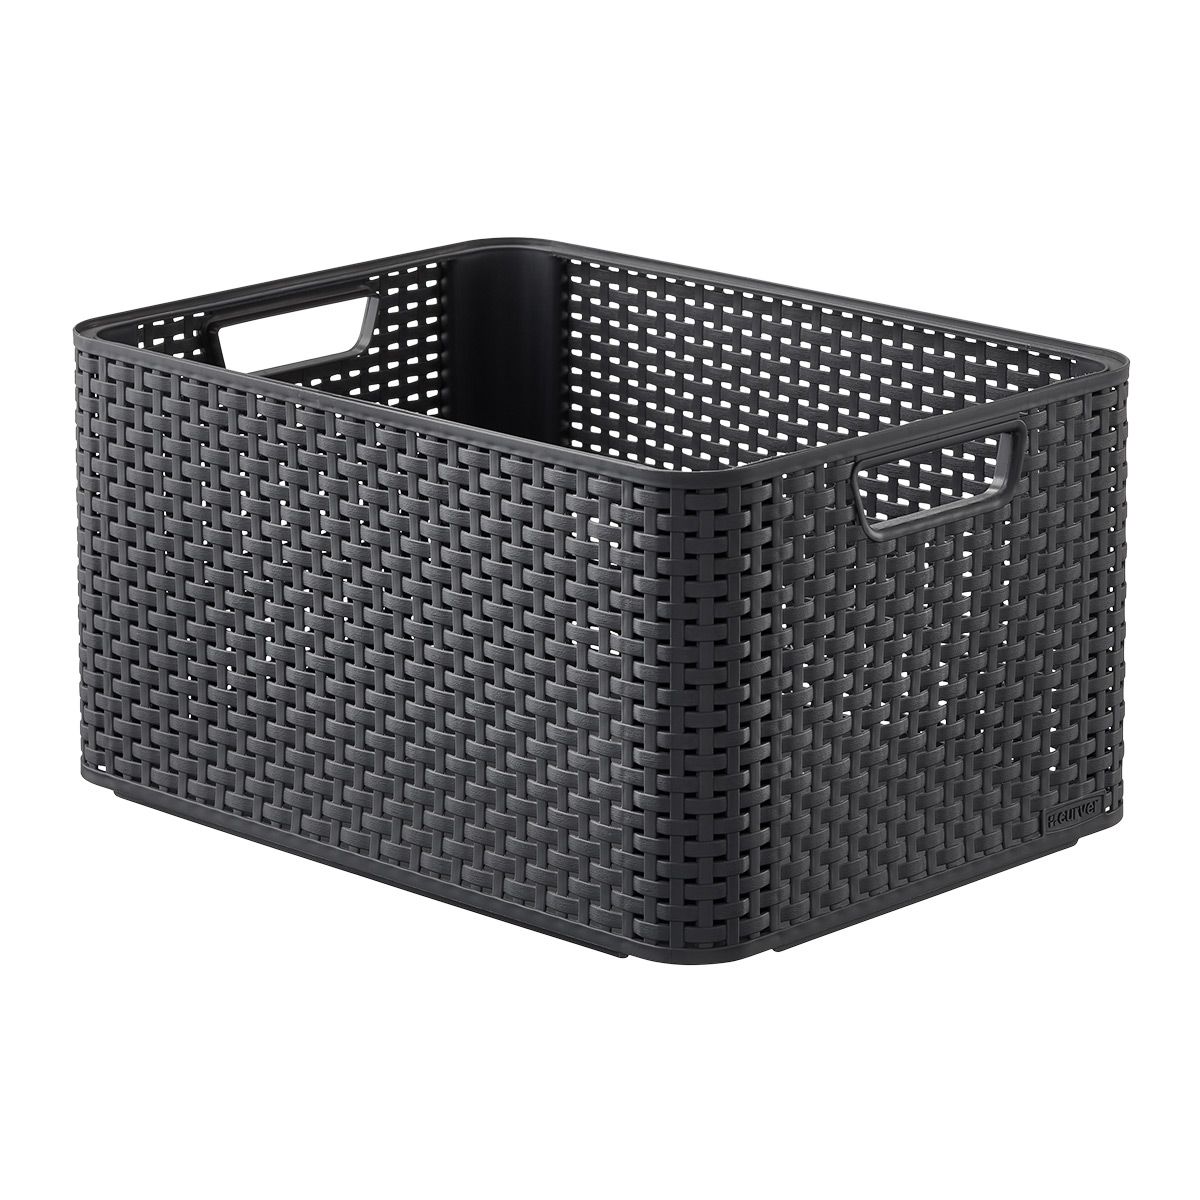 Basketweave Bin | The Container Store